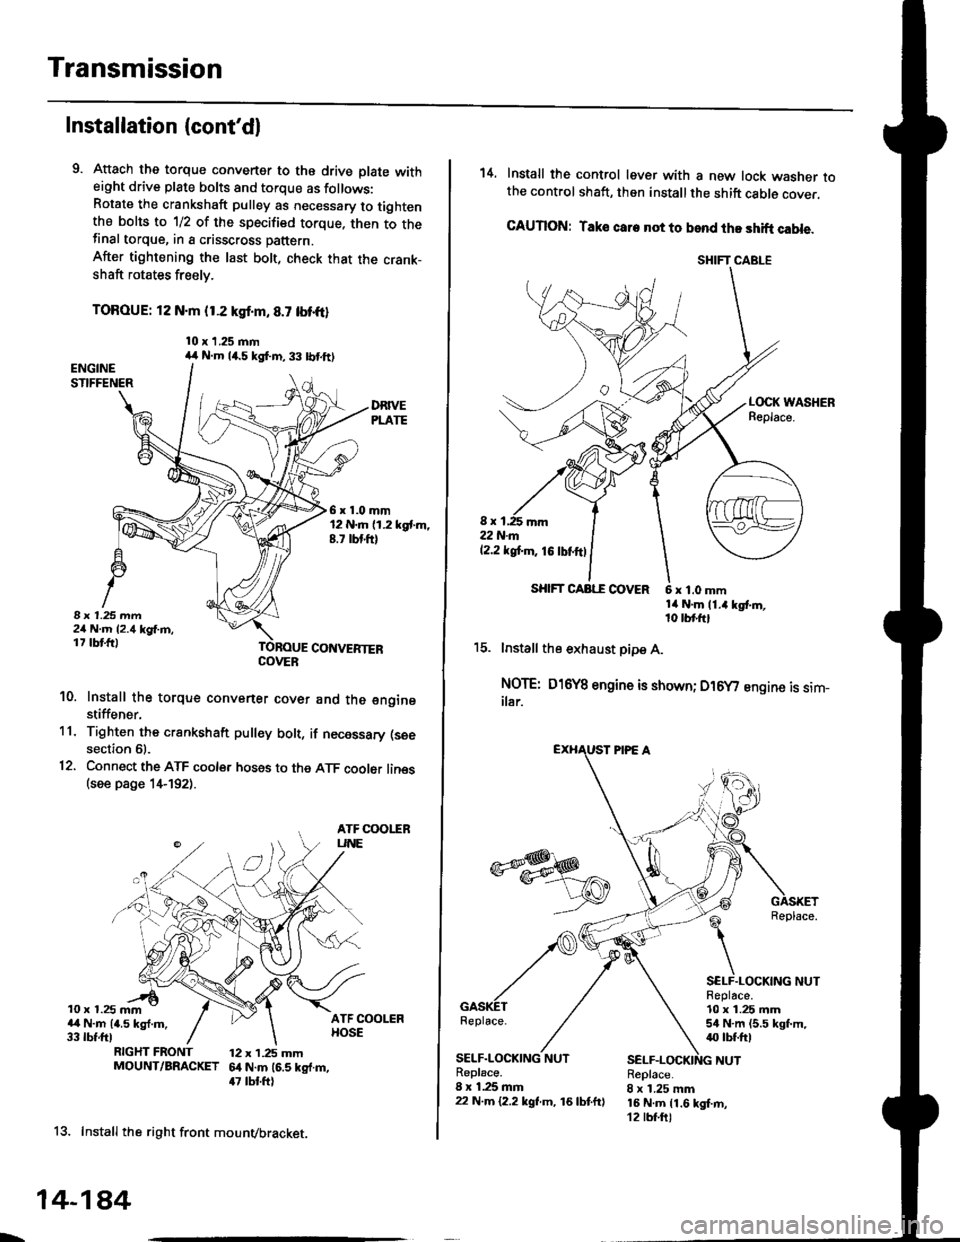 HONDA CIVIC 1997 6.G Workshop Manual Transmission
Installation (contdl
9. Attach the torque converter to the drive plate witheight drive plate bolts and torque as follows:Rotate the crankshaft pulley as necessary to tightenthe bolts to 